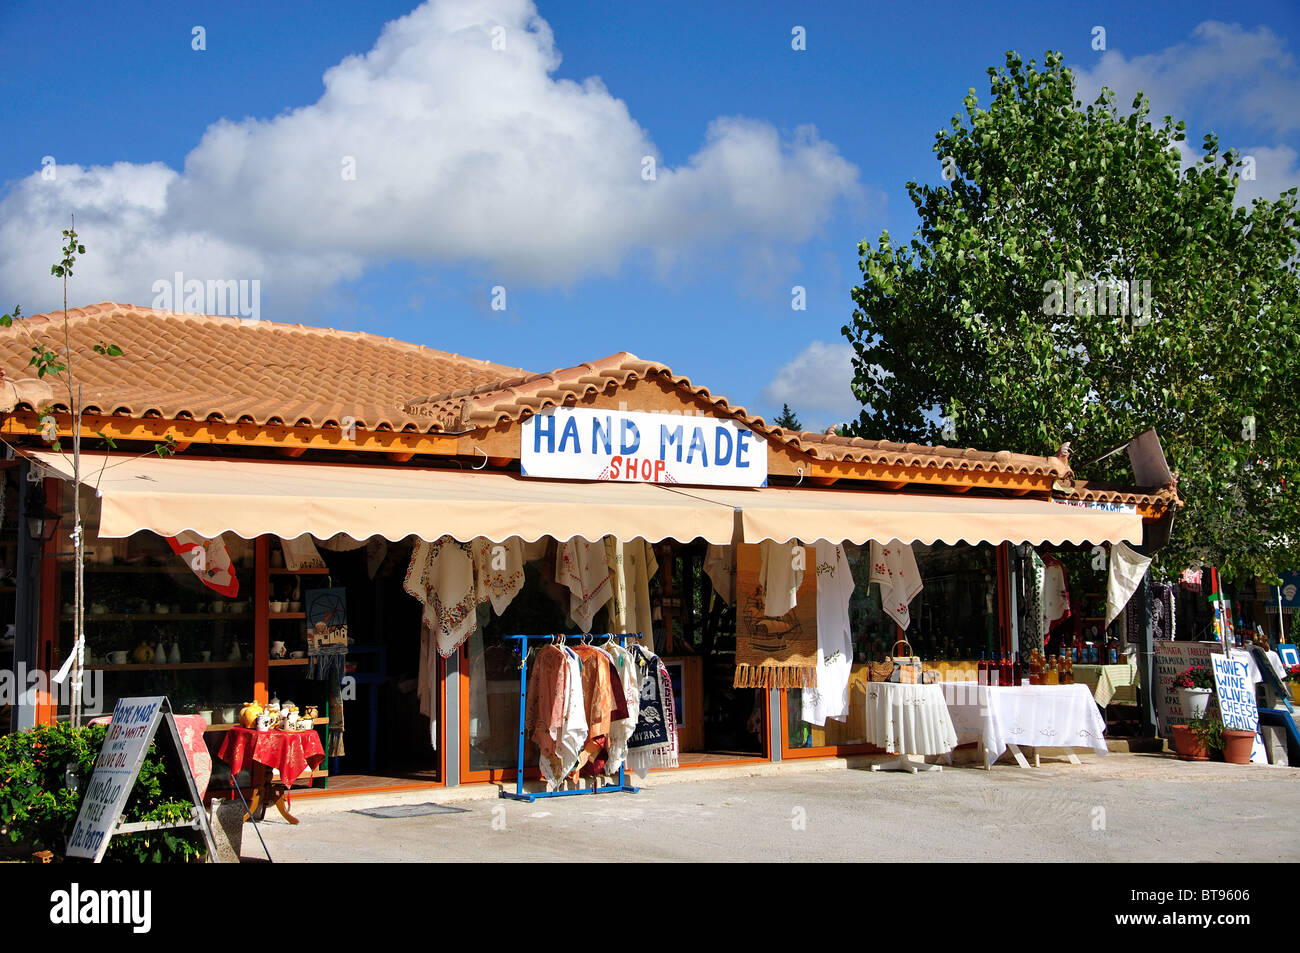 Local products and souvenir shop, Anafonitria, Zakynthos, Ionian Islands, Greece Stock Photo